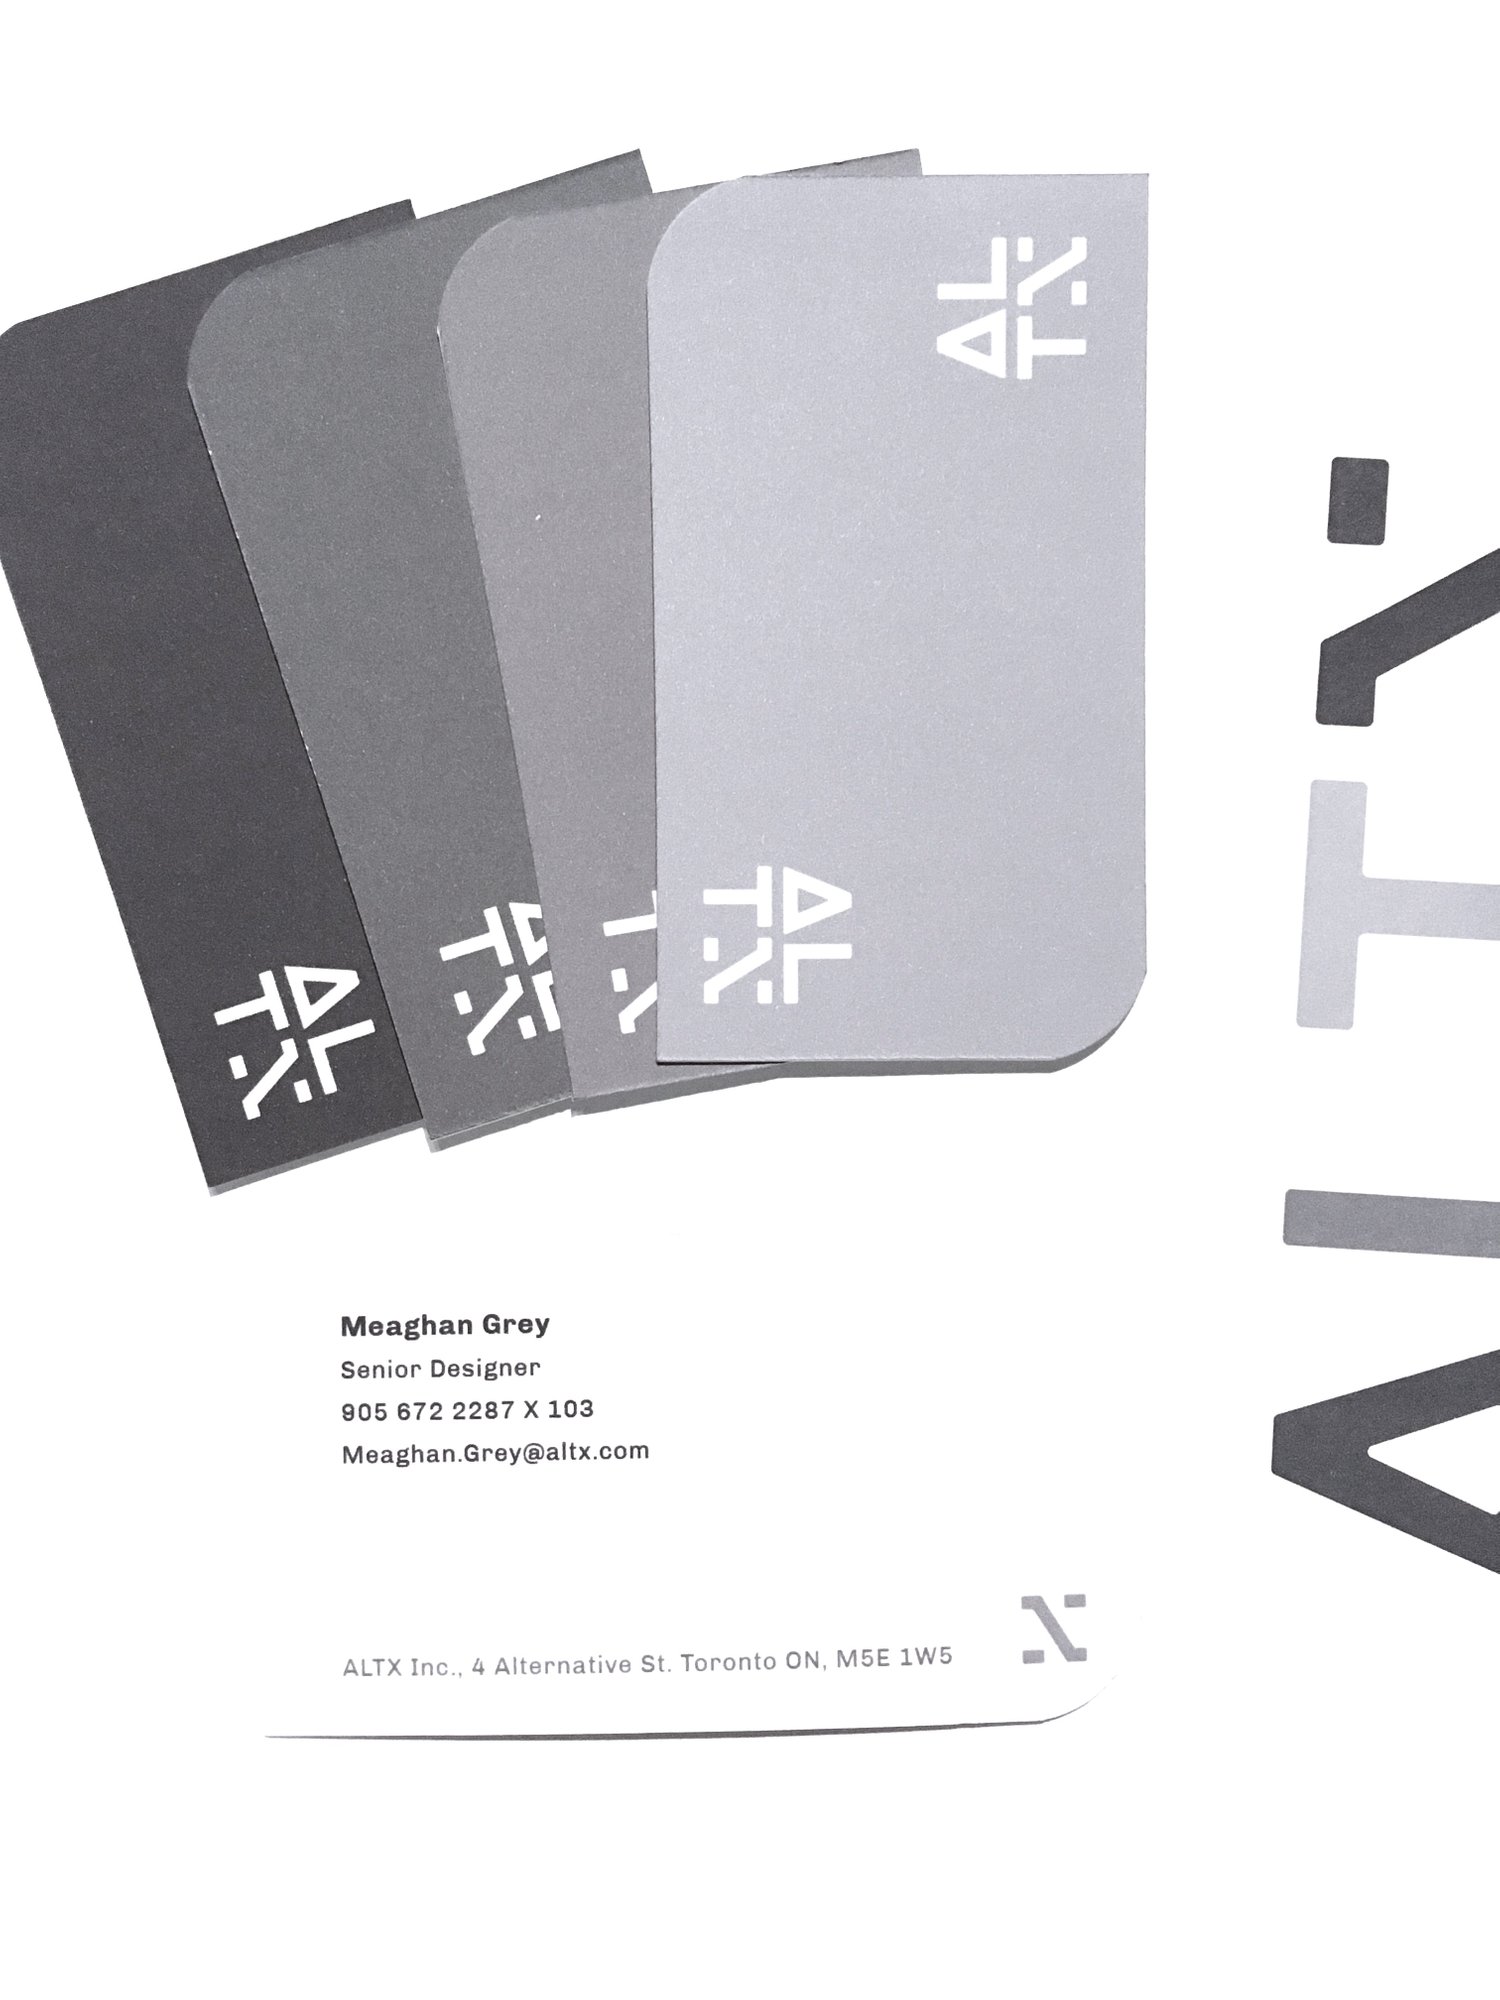 A spread of the monochromatic business cards and a letterhead stack.